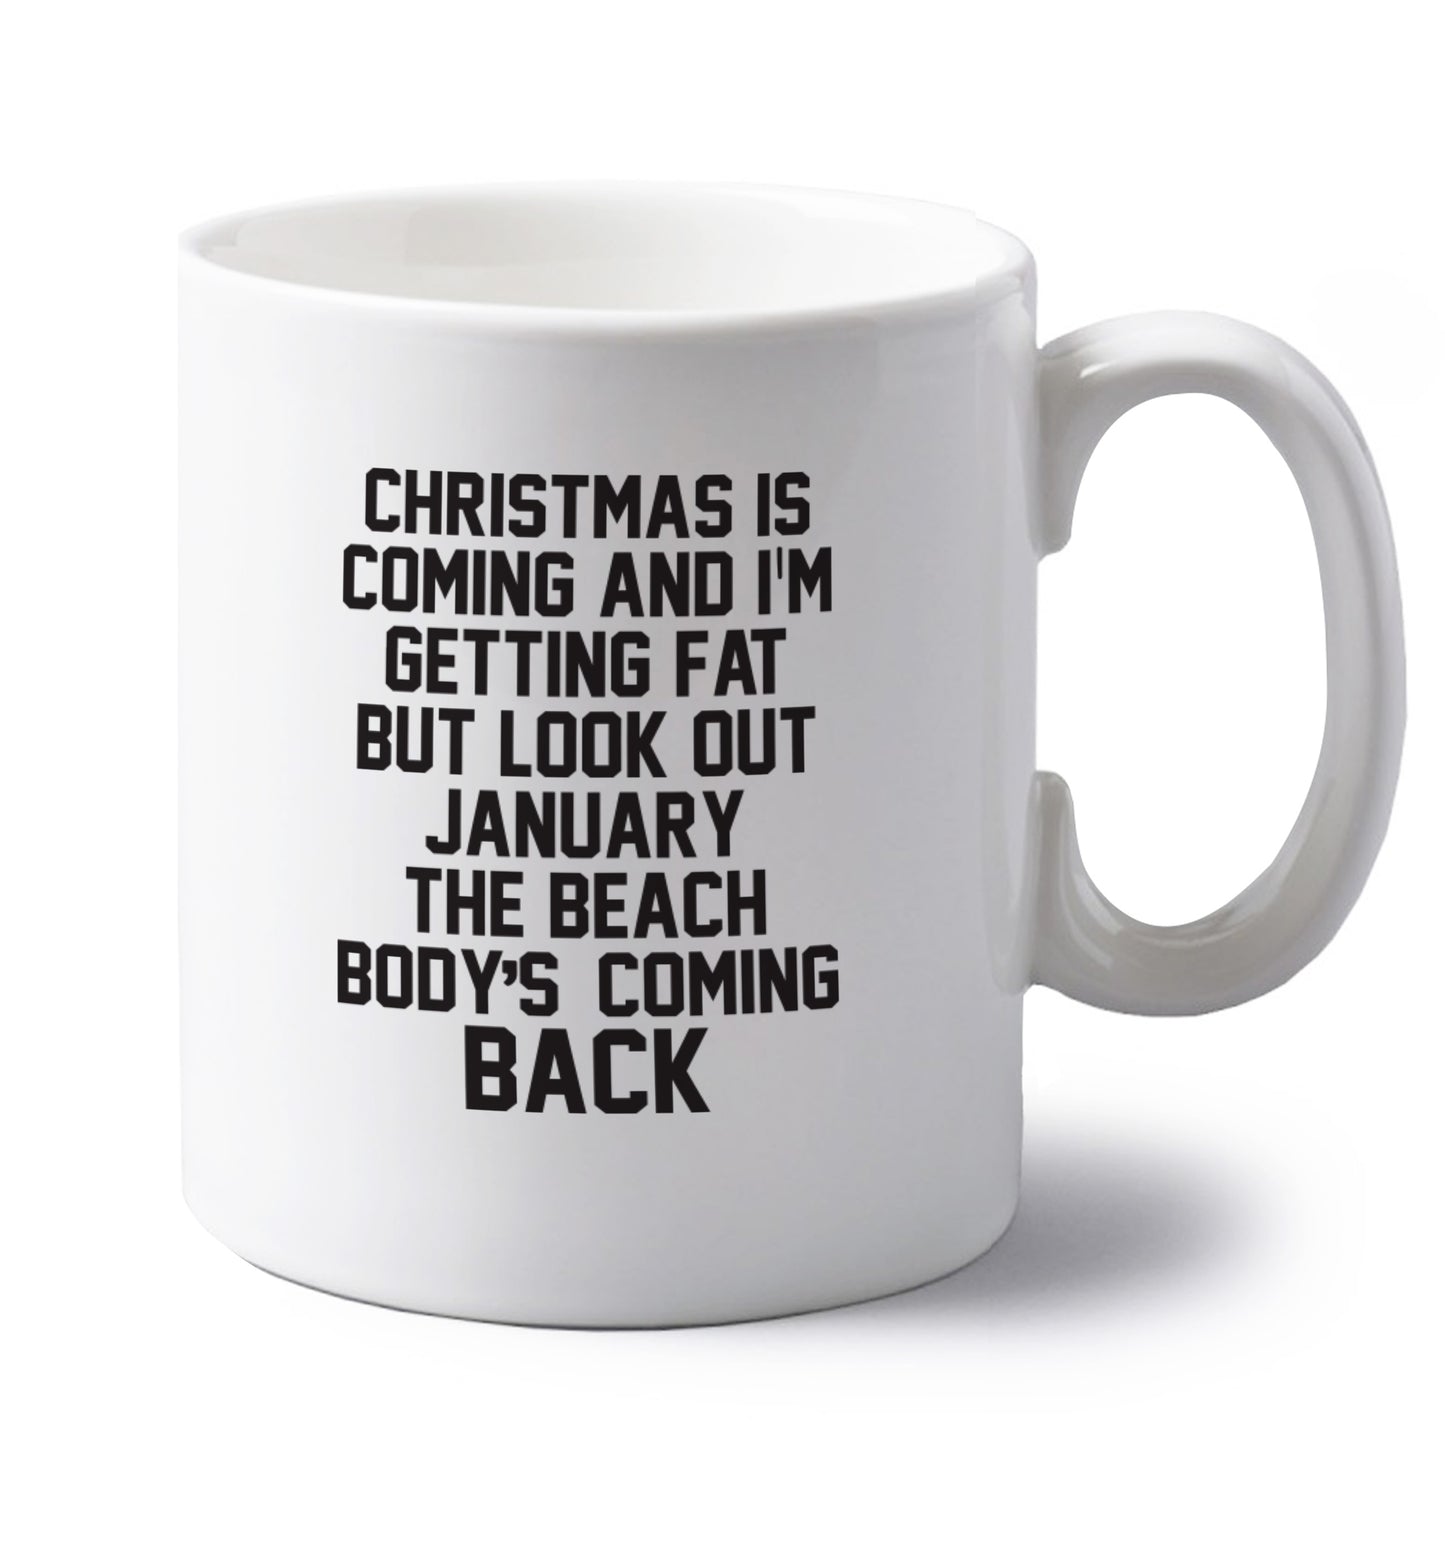 Christmas is coming and I'm getting fat but look out January the beach body's coming back! left handed white ceramic mug 